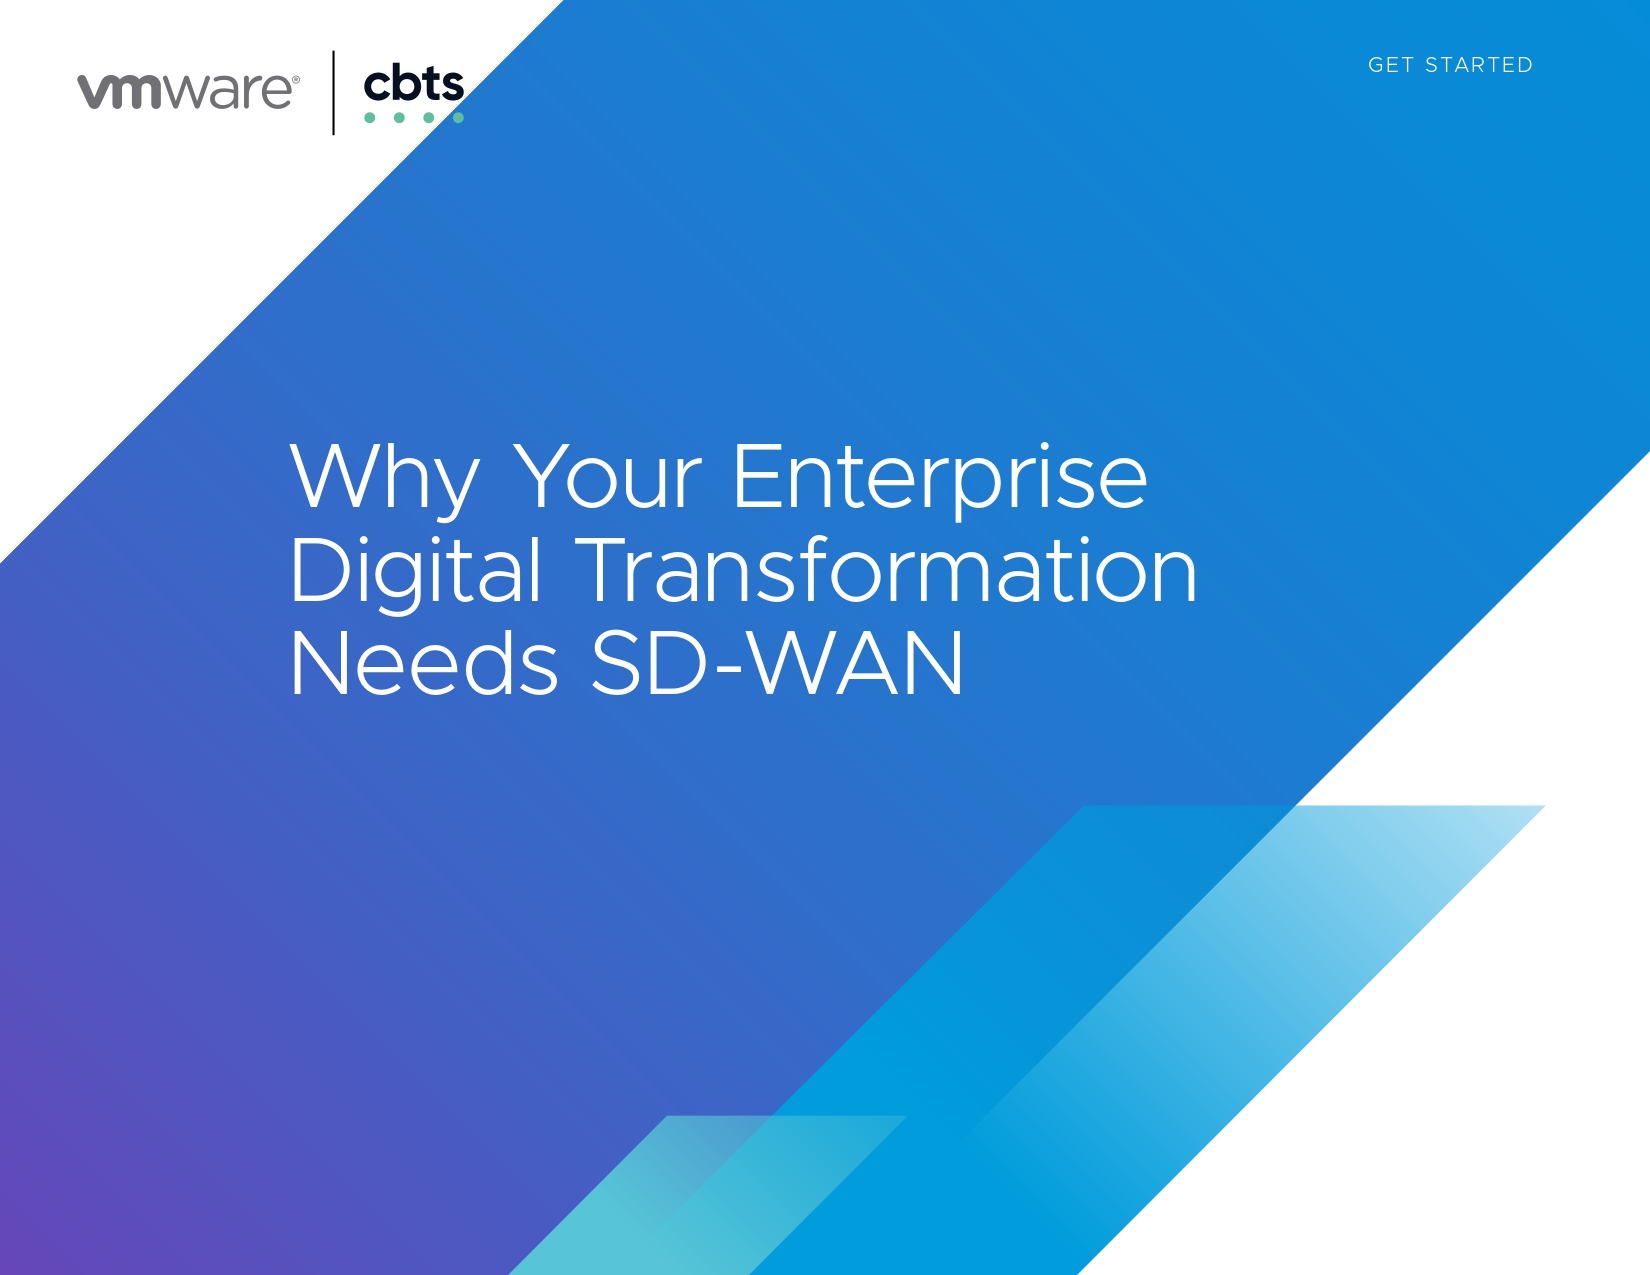 +211431_NEW_Co-branded_CBTS_Why_Your_Enterprise_Digital_Transformation_Needs_SD-WAN-e-book_page-0001